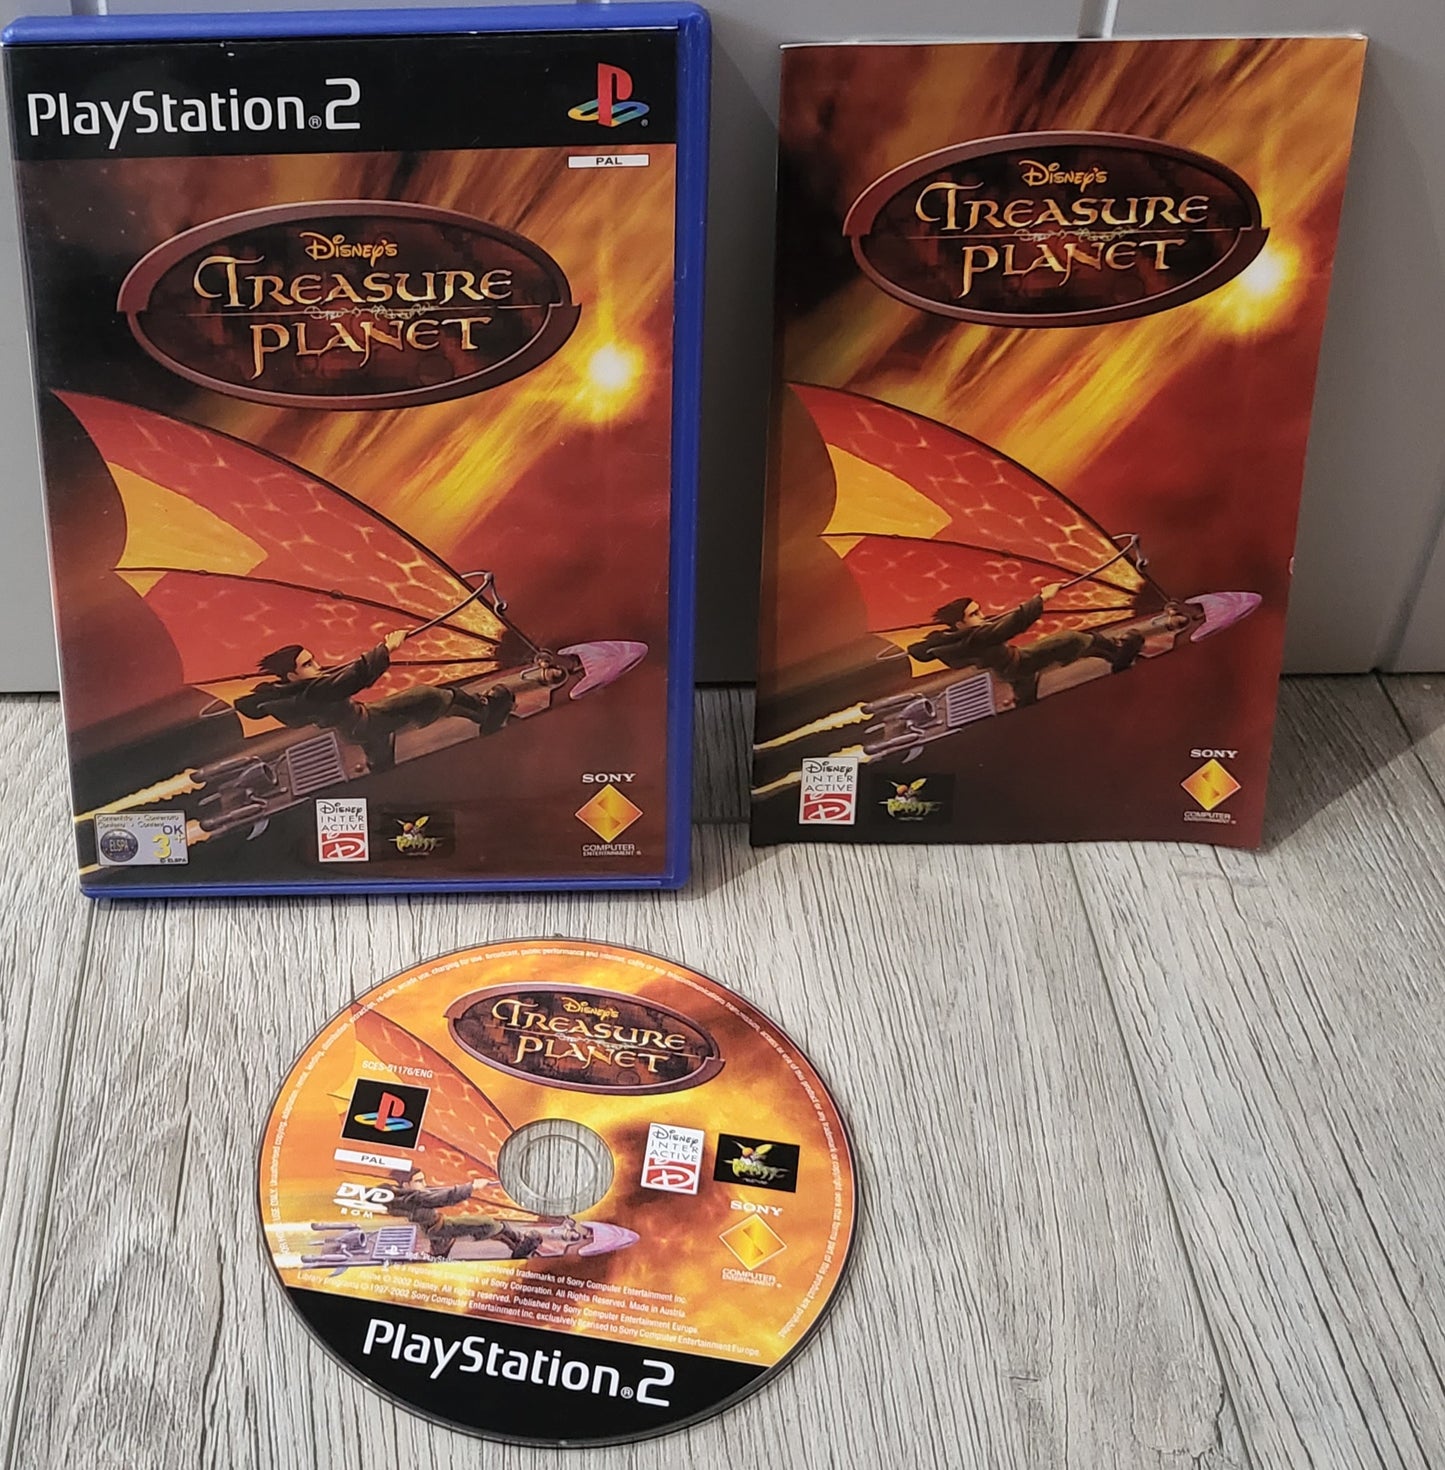 Disney's Treasure Planet Sony Playstation 2 (PS2) Game